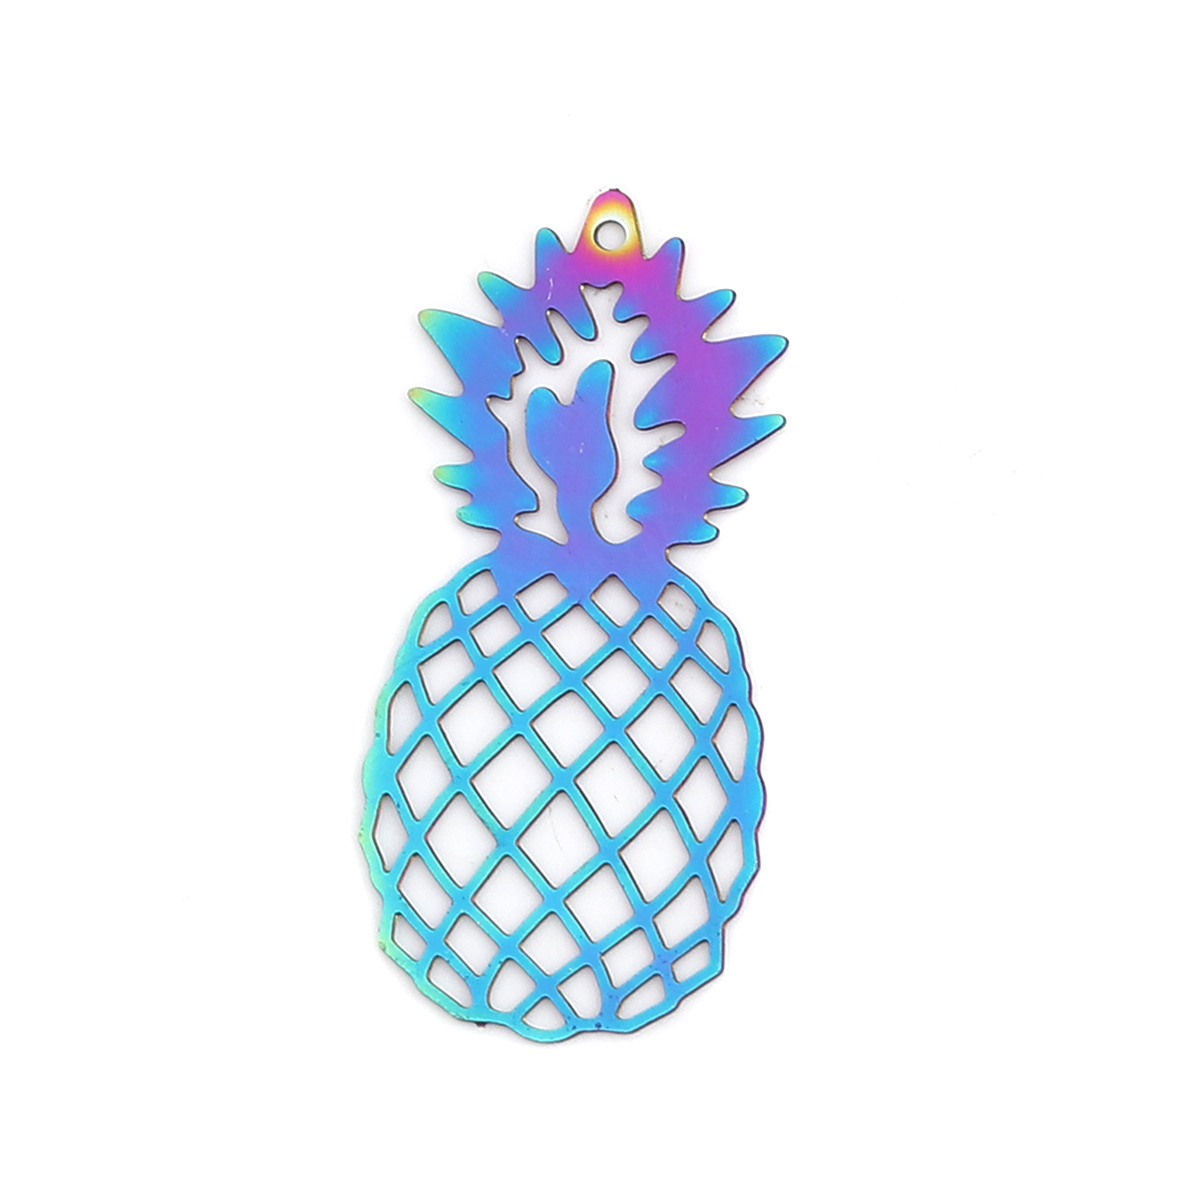 Picture of Stainless Steel Filigree Stamping Pendants Pineapple/ Ananas Fruit Purple & Blue 36mm x 16mm, 10 PCs